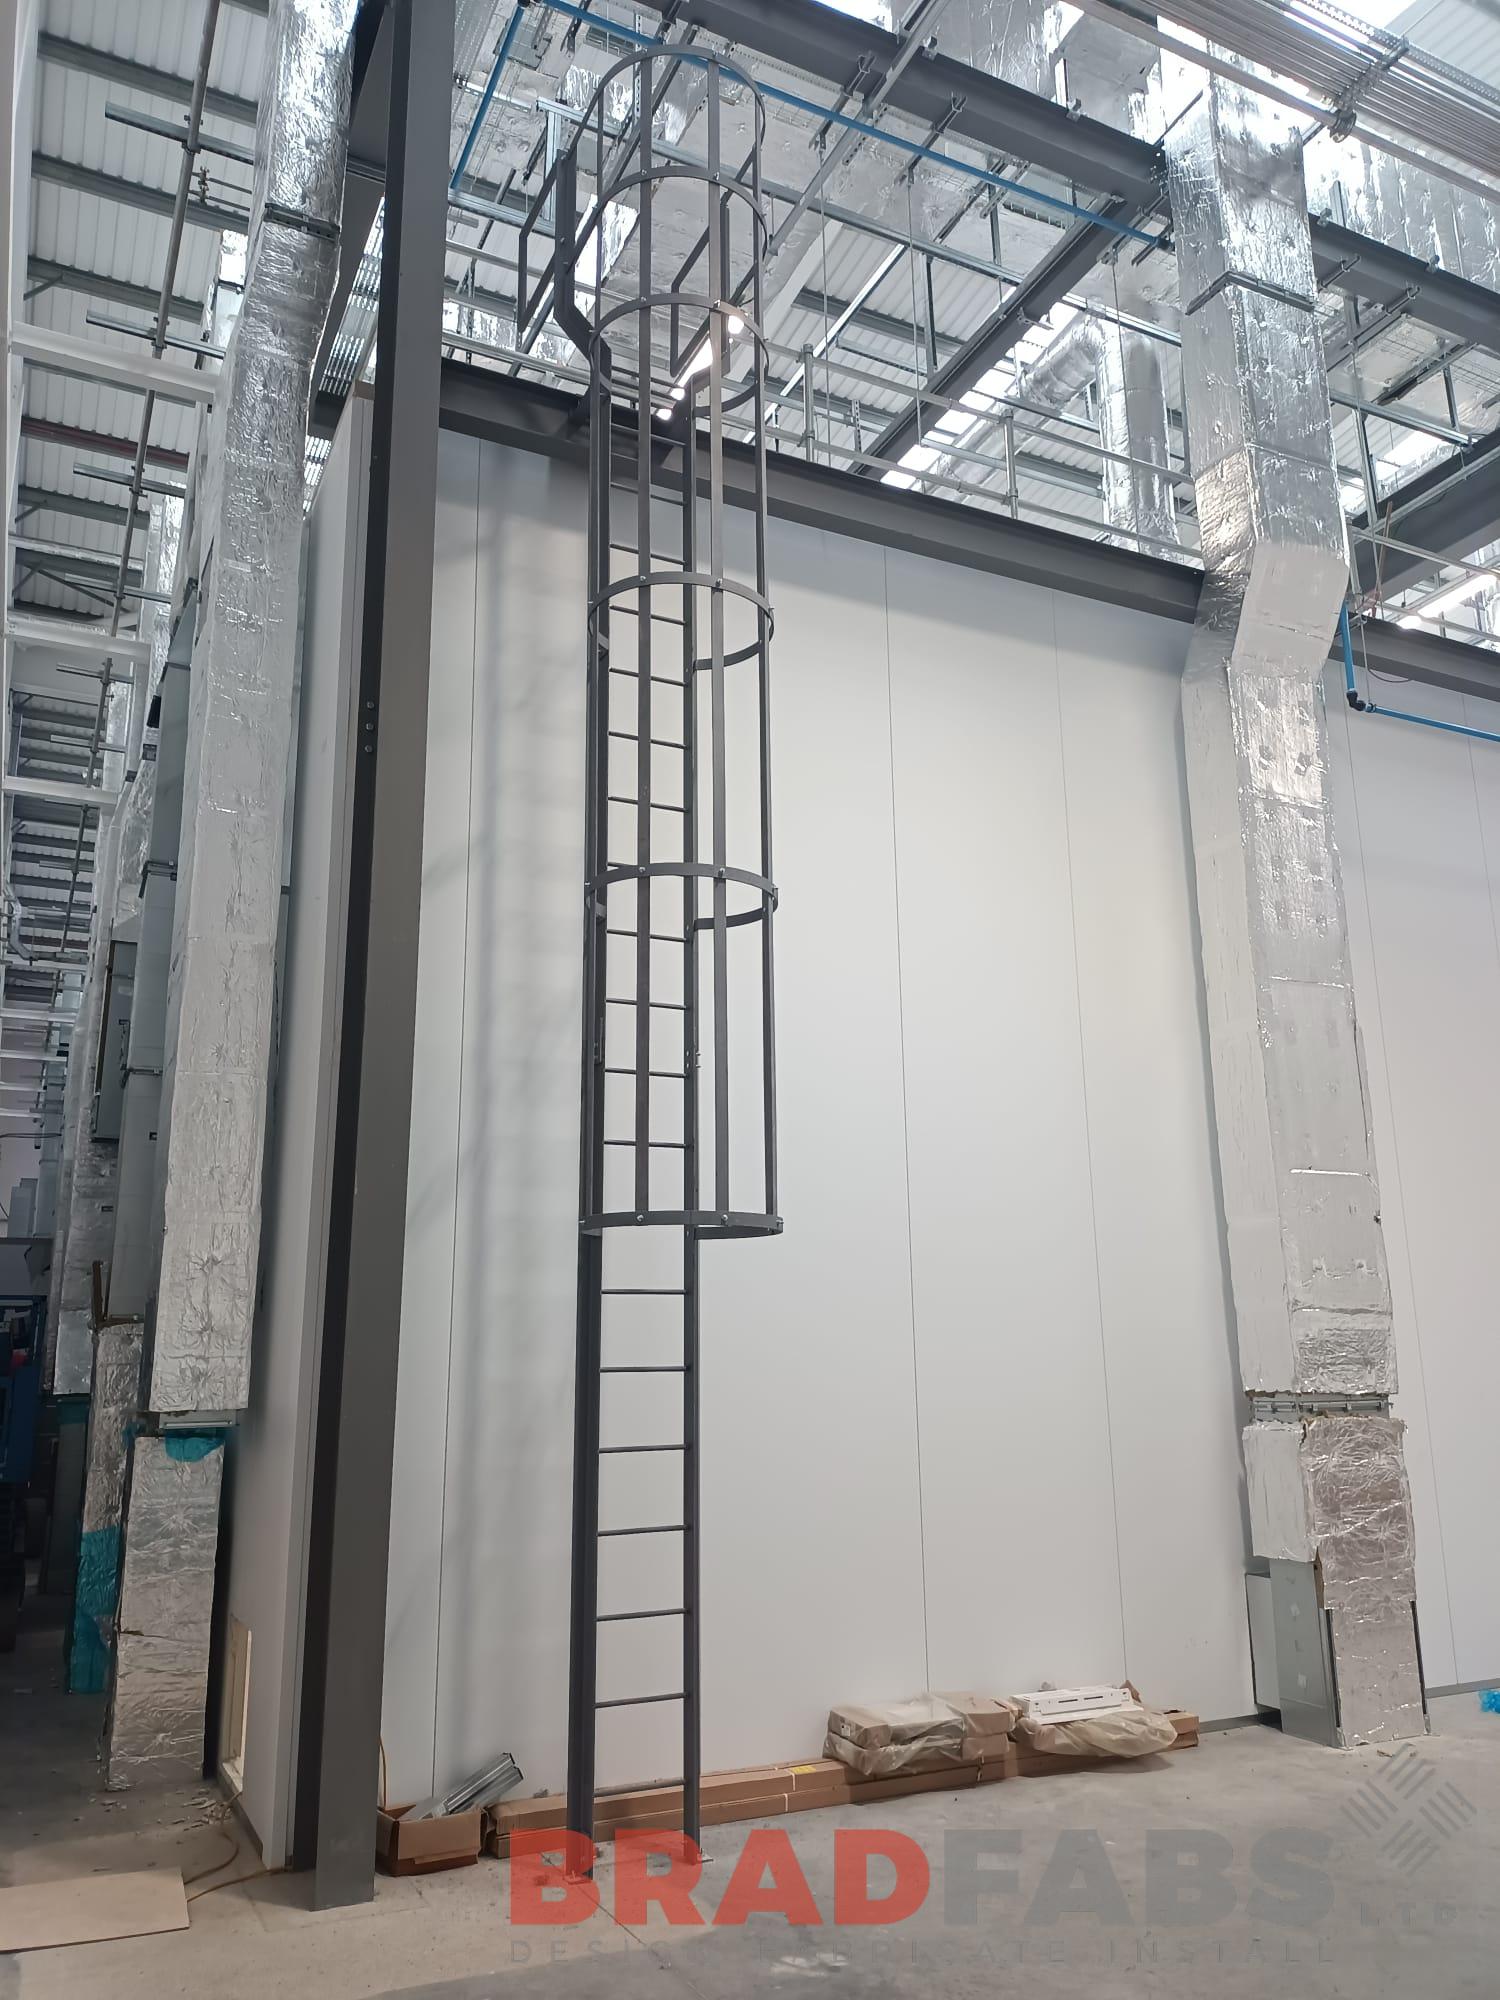 Internal cat ladder at an industrial commercial property by bradfabs 